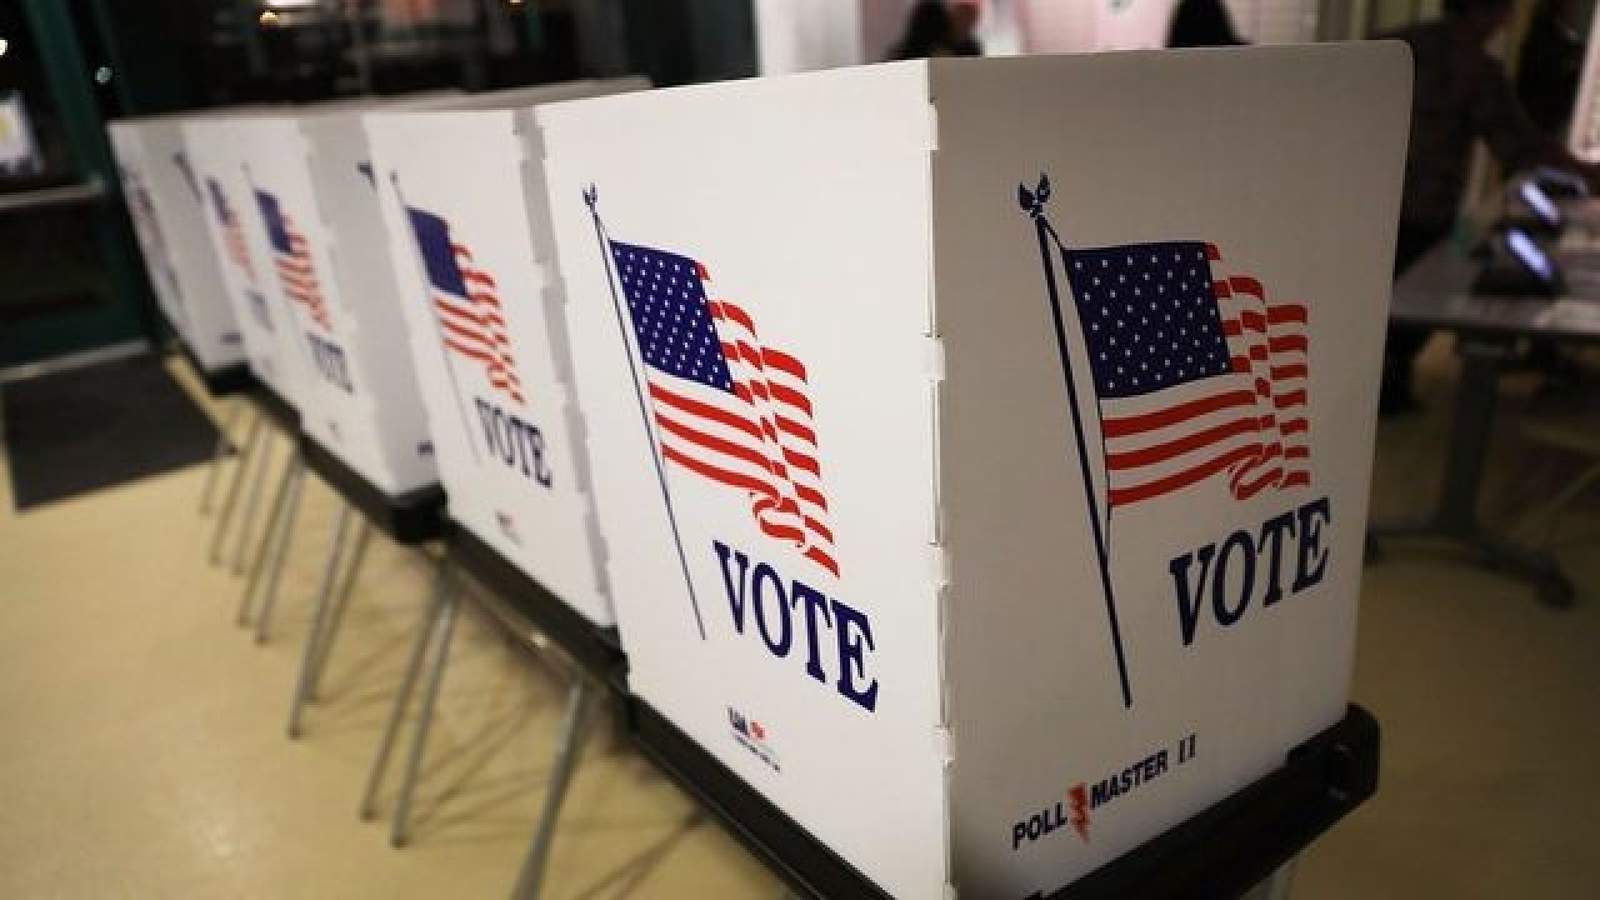 Don’t forget: Today is the last day to register to vote in Texas